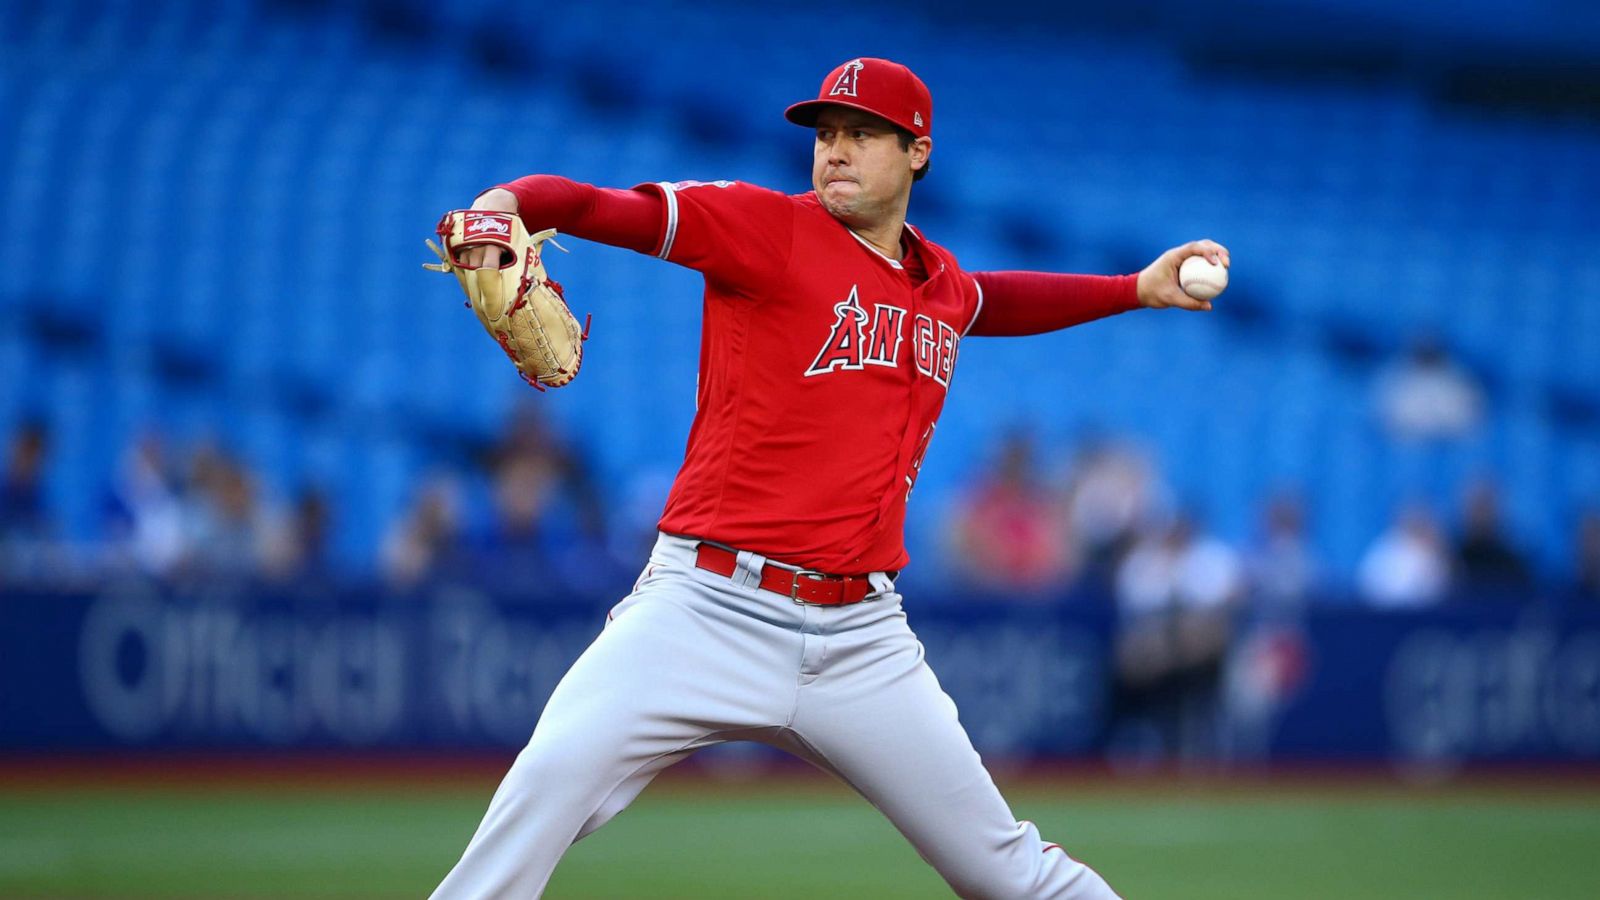 Late Los Angeles Angels pitcher Tyler Skaggs to be honored with